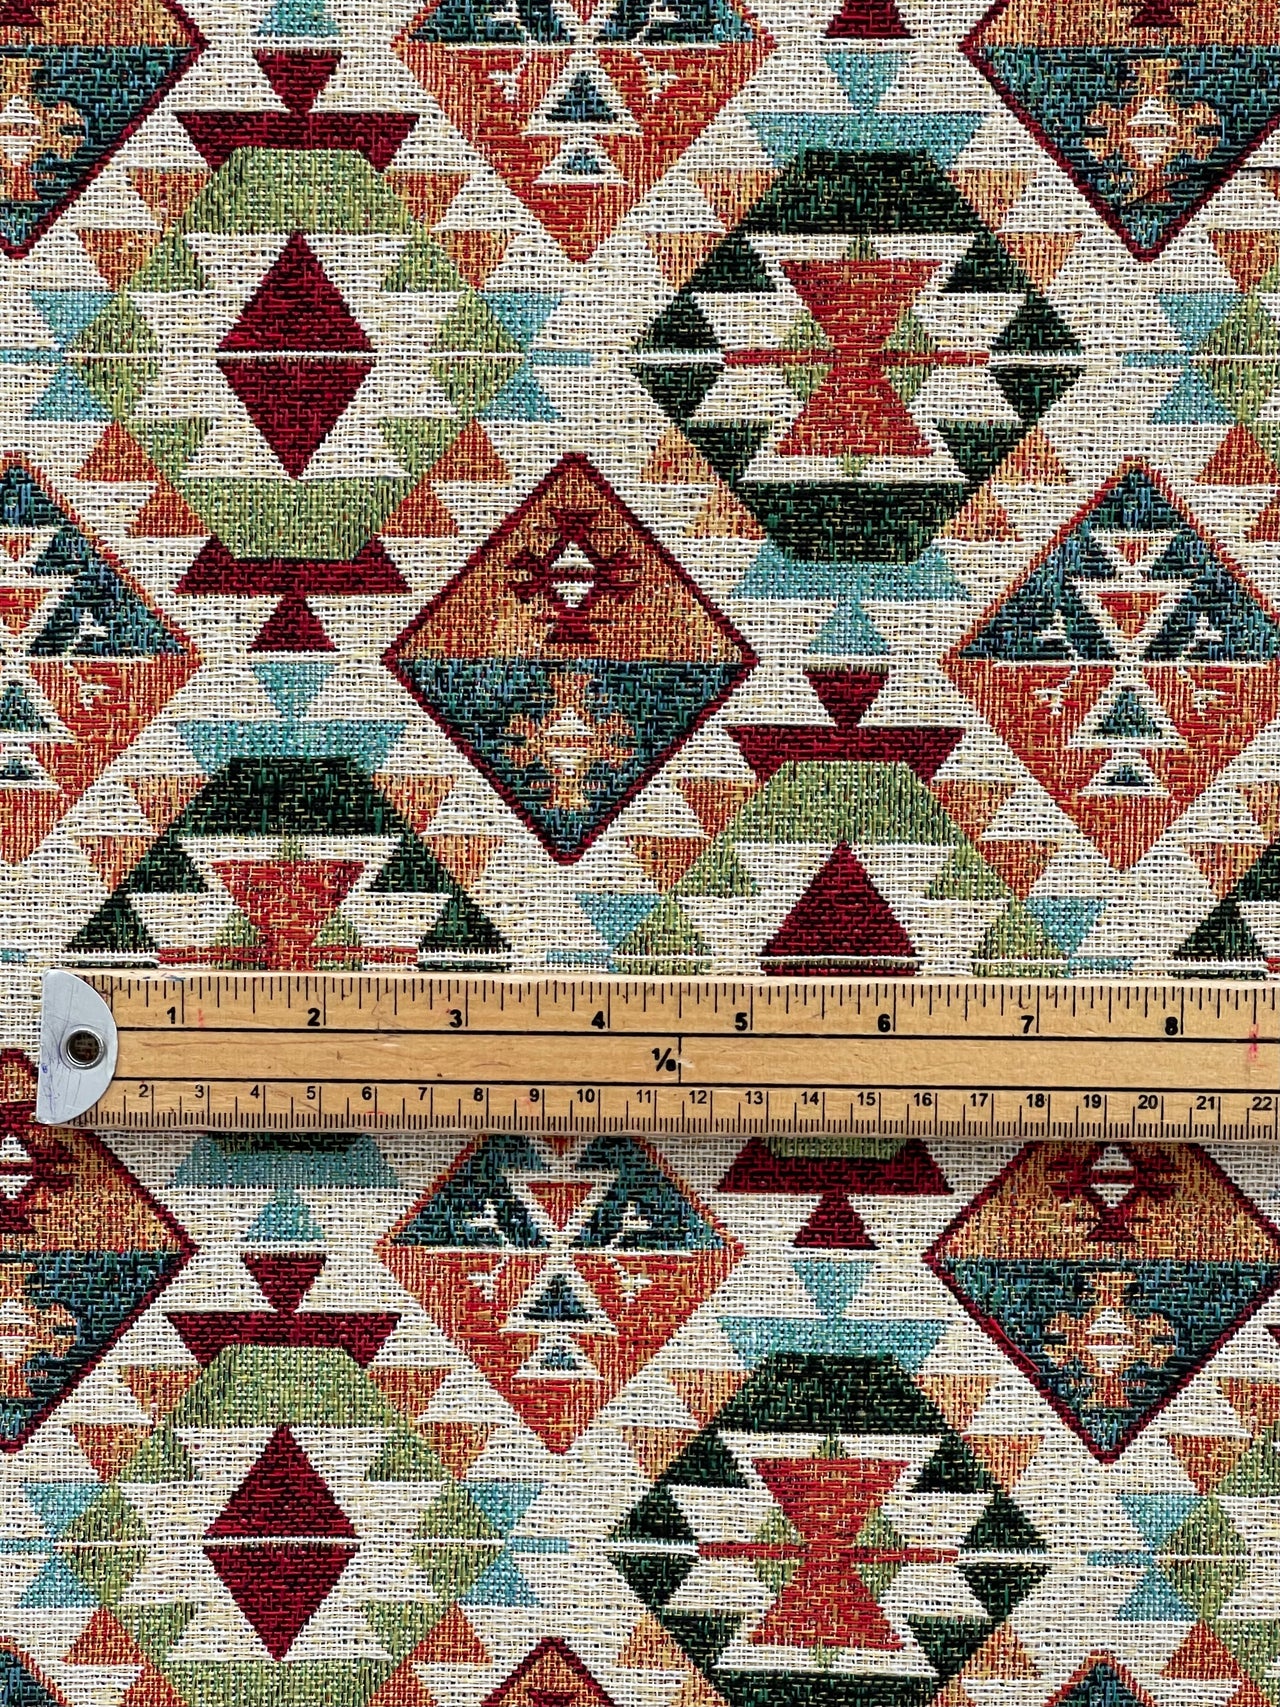 Moroccan-Inspired Kilim Fabric: Old Afghan Rug Style in Cherry Red, Blue, and Green - Perfect for Unique Home Decor - Sold by the Metre